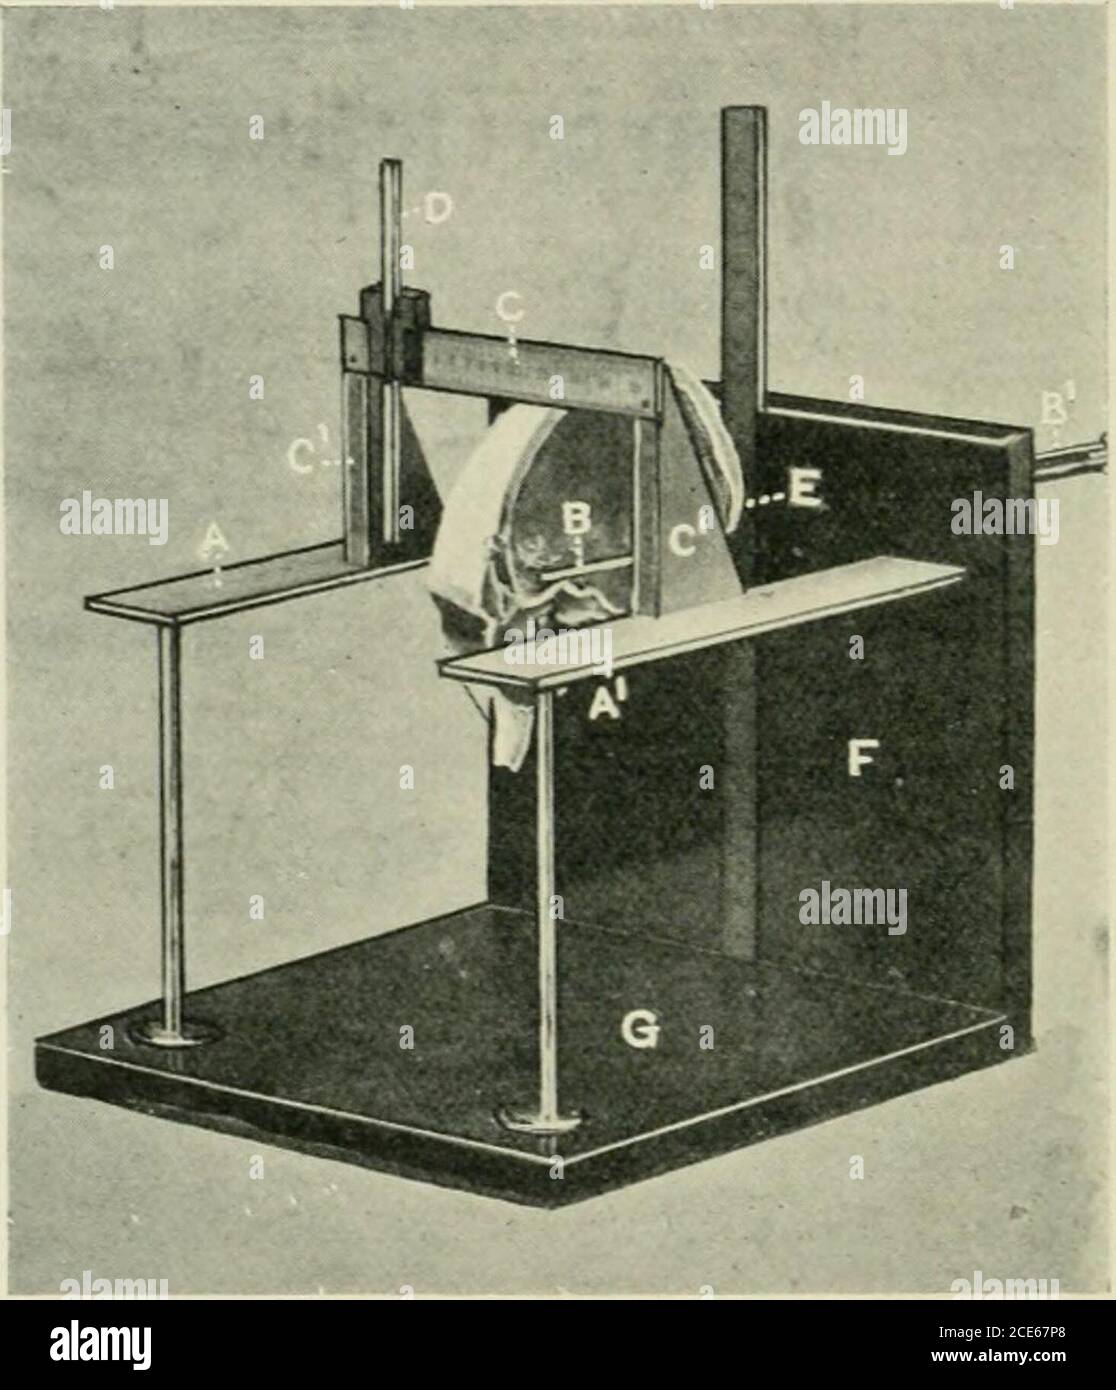 . Journal of anatomy . be pushed forwards in front of the vertical plate for an. Fig. 1.—Craniometer with skull (20S mm. long). The skull is bisected in thespecimen shown in order to show the position of the orienting rod B B. A, A, lateral plates, marked with millimetre scale, zero being at tlieir commencement at the verticalplate (F); B B, orienting rod; it works along a vernier placed behind the vertical plate (K);C, the bridge ; C C, uprights of bridge ; D, sliding indicator ou bridge ; E, zero-point, whereorienting rod perforates the vertical plate ; F, vertical plate; G, foot-plate. exte Stock Photo